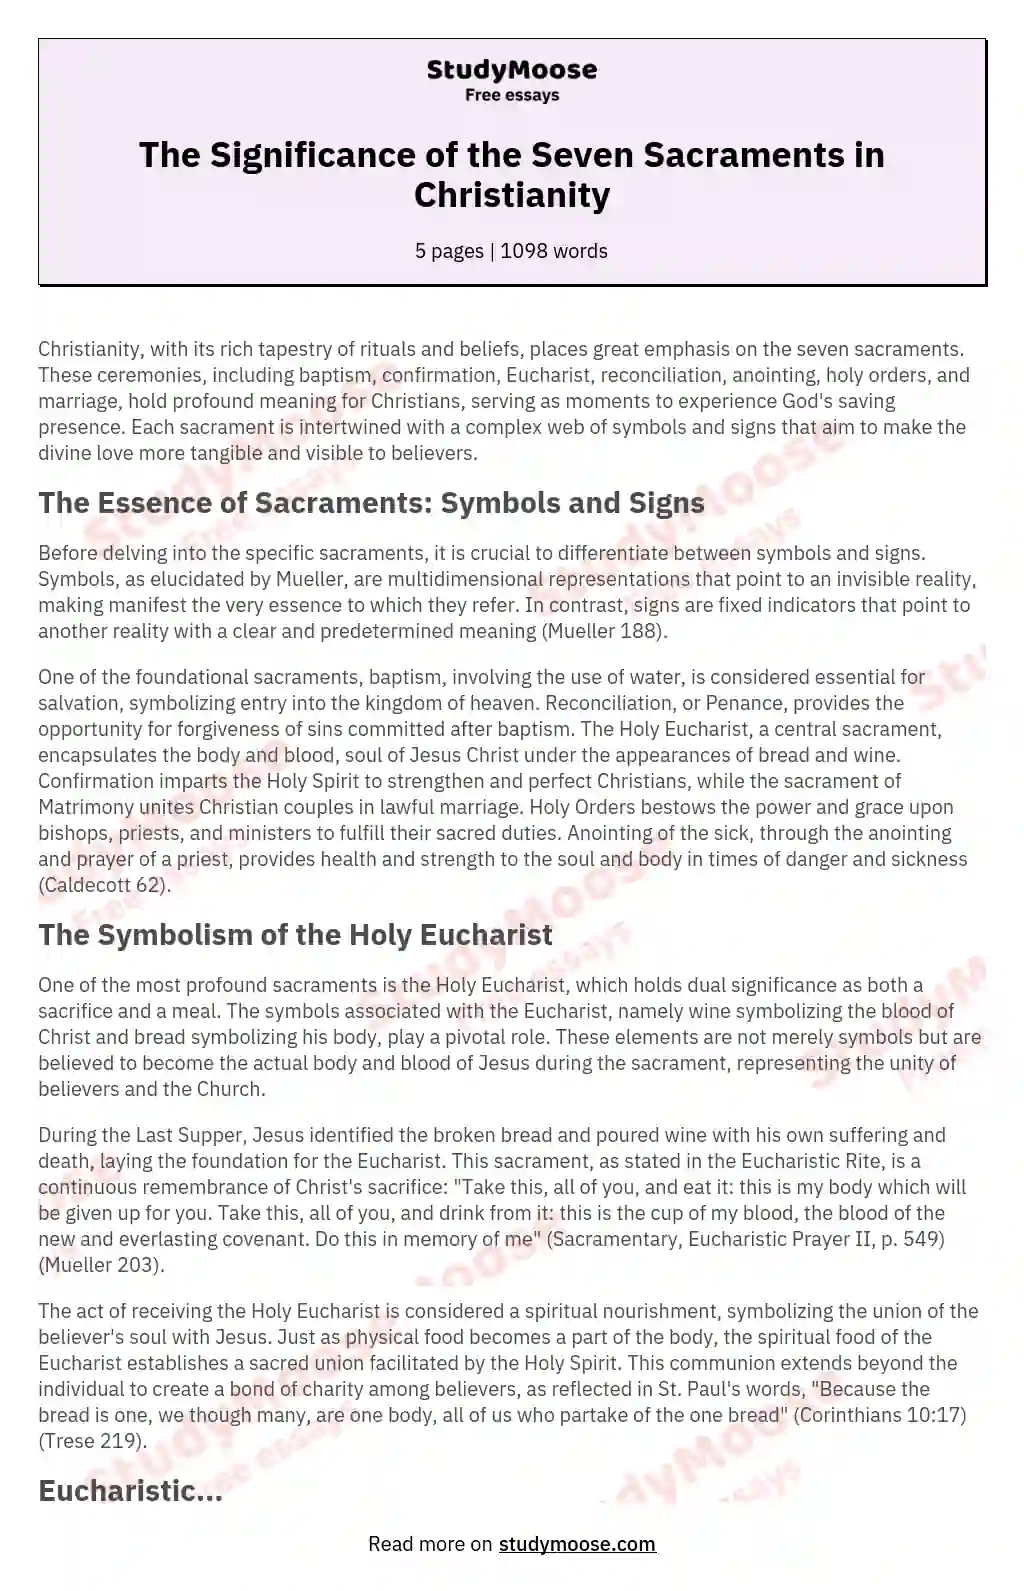 The Significance of the Seven Sacraments in Christianity essay